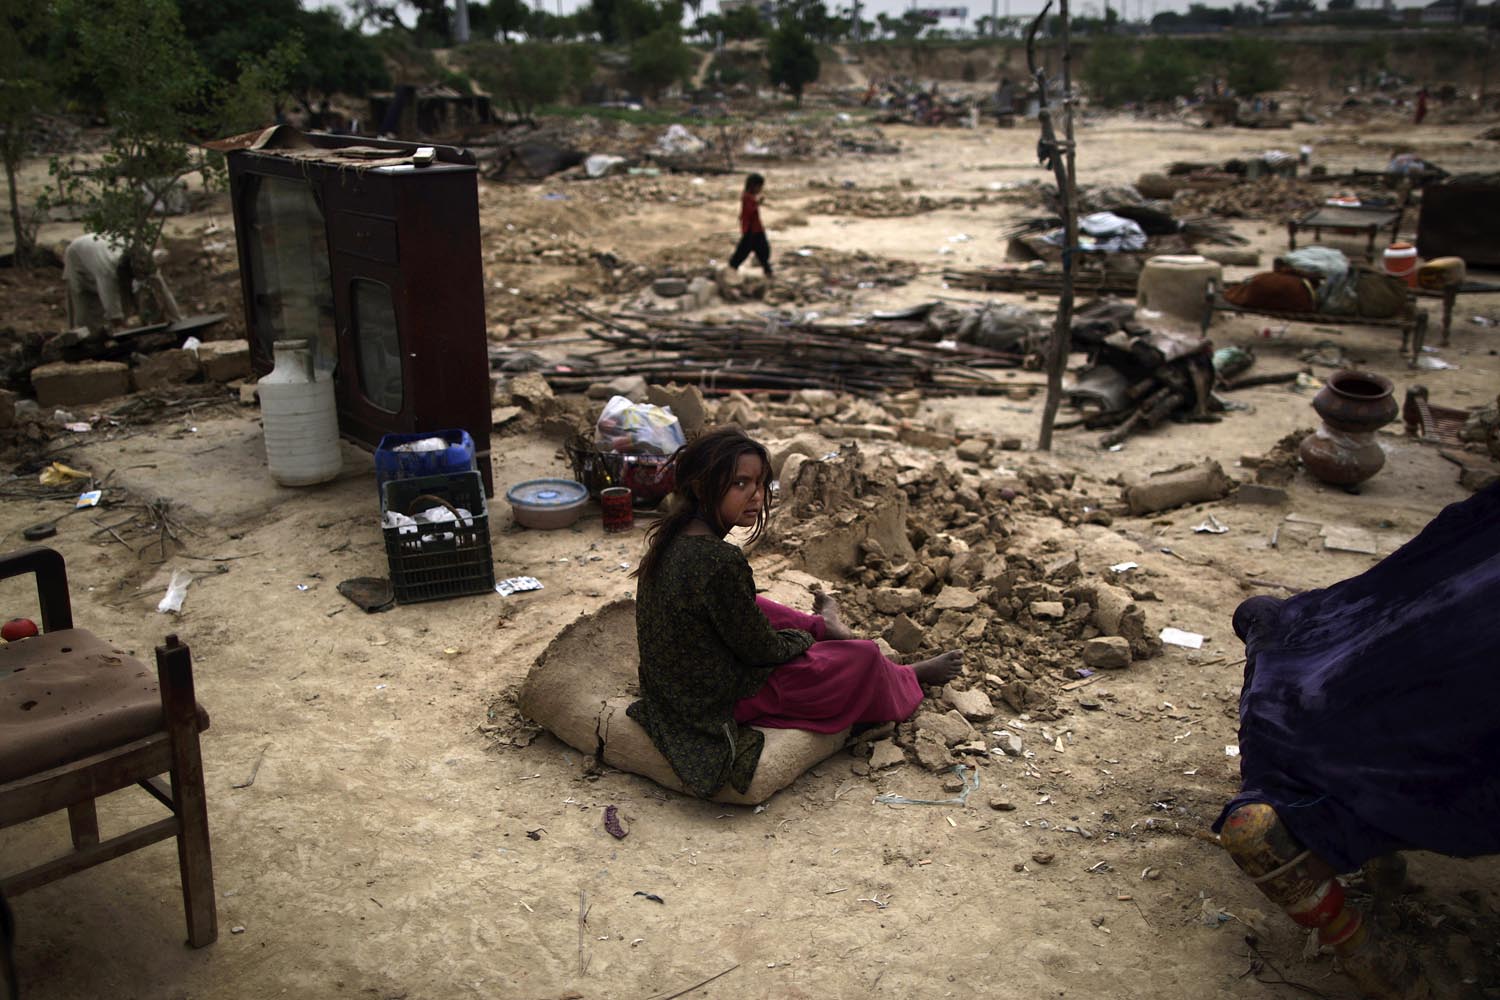 April 23, 2013. A Pakistani girl, who was displaced with her family by 2010 floods in Pakistan's Sindh province, sits next to her family's belongings among the rubble of her makeshift home, after it was destroyed, along with other homes, by the Capital Development Authority for being built on illegal lands, on the outskirts of Islamabad.